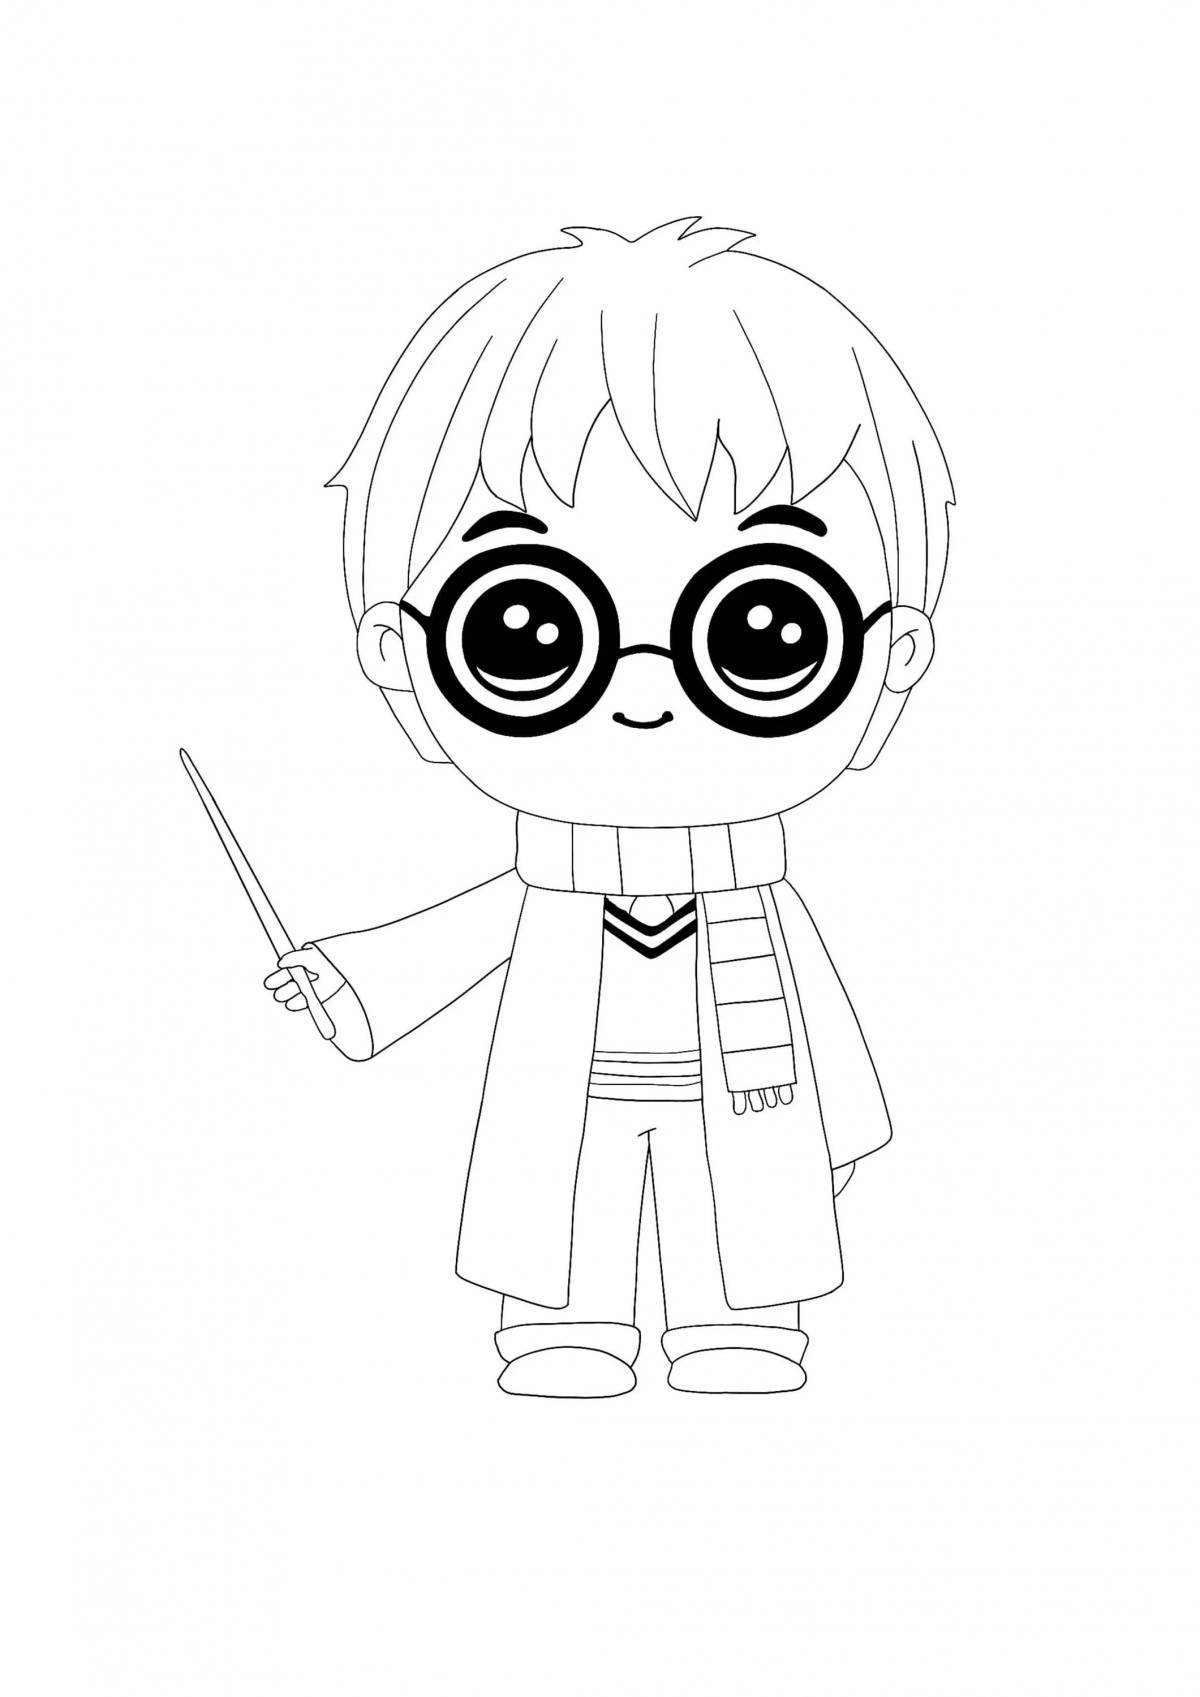 Harry potter beautiful coloring book for girls